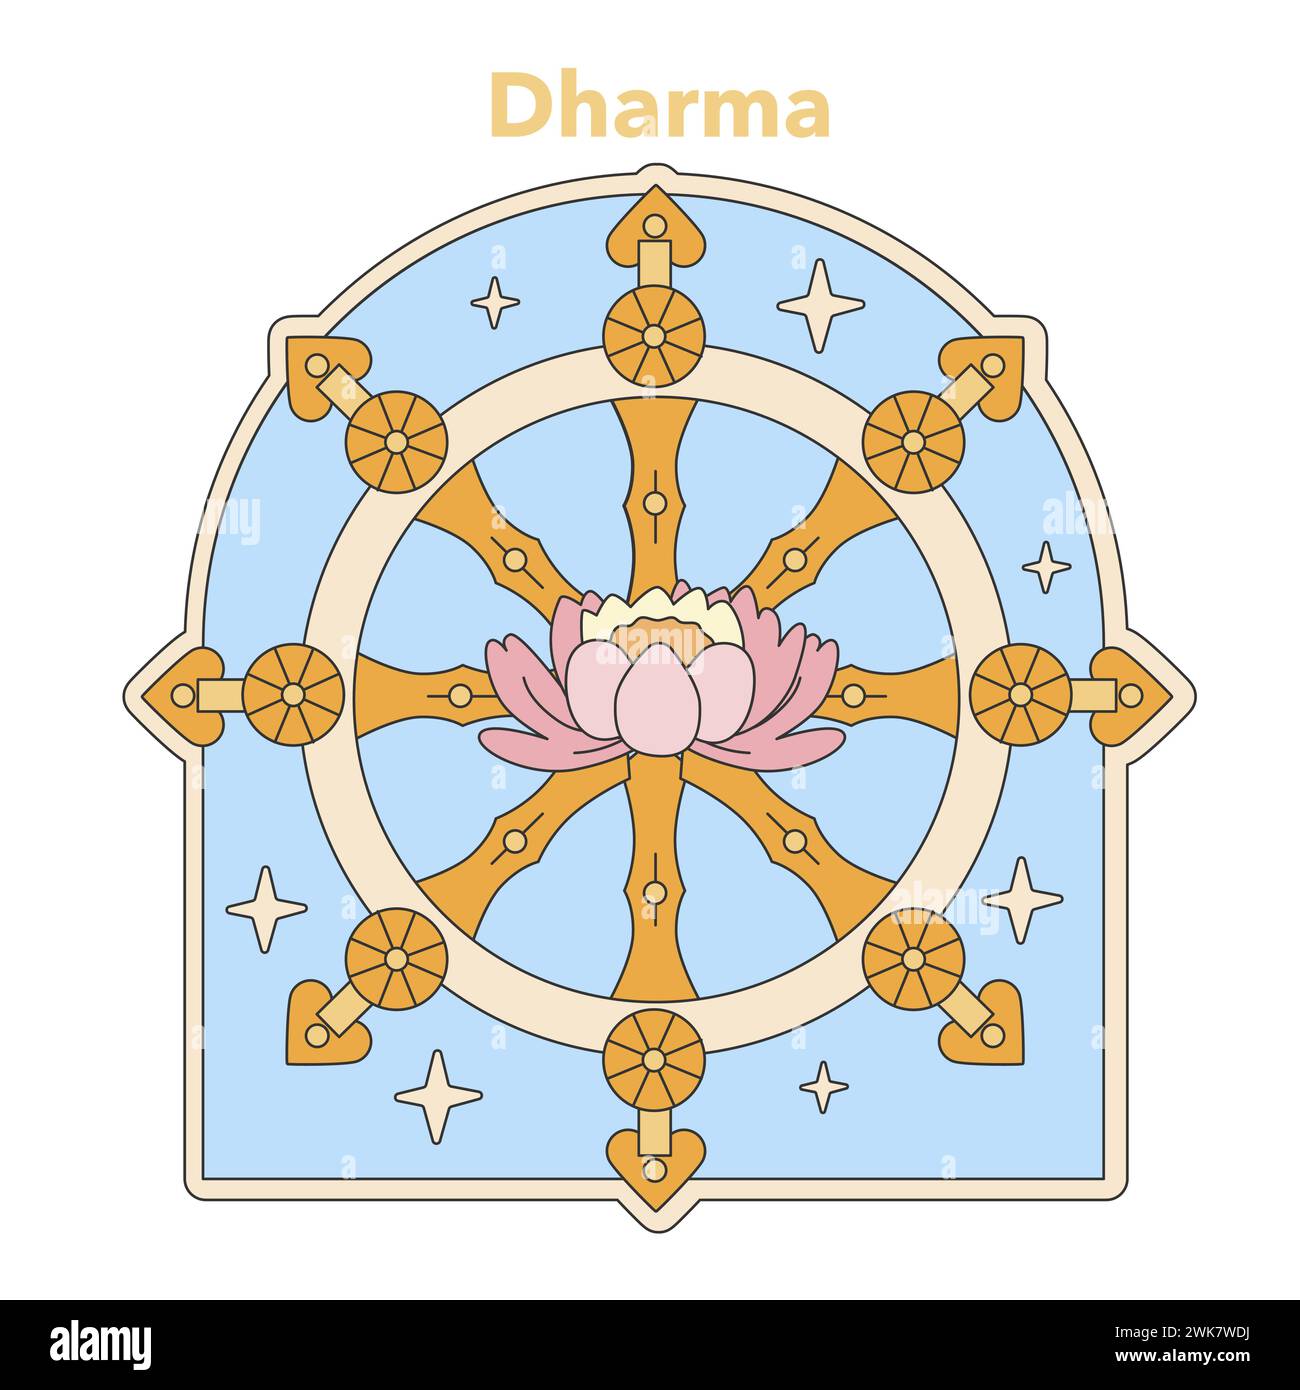 Dharma wheel illustration. Symbolic representation of Buddha's teachings and the path to enlightenment. Flat vector illustration Stock Vector